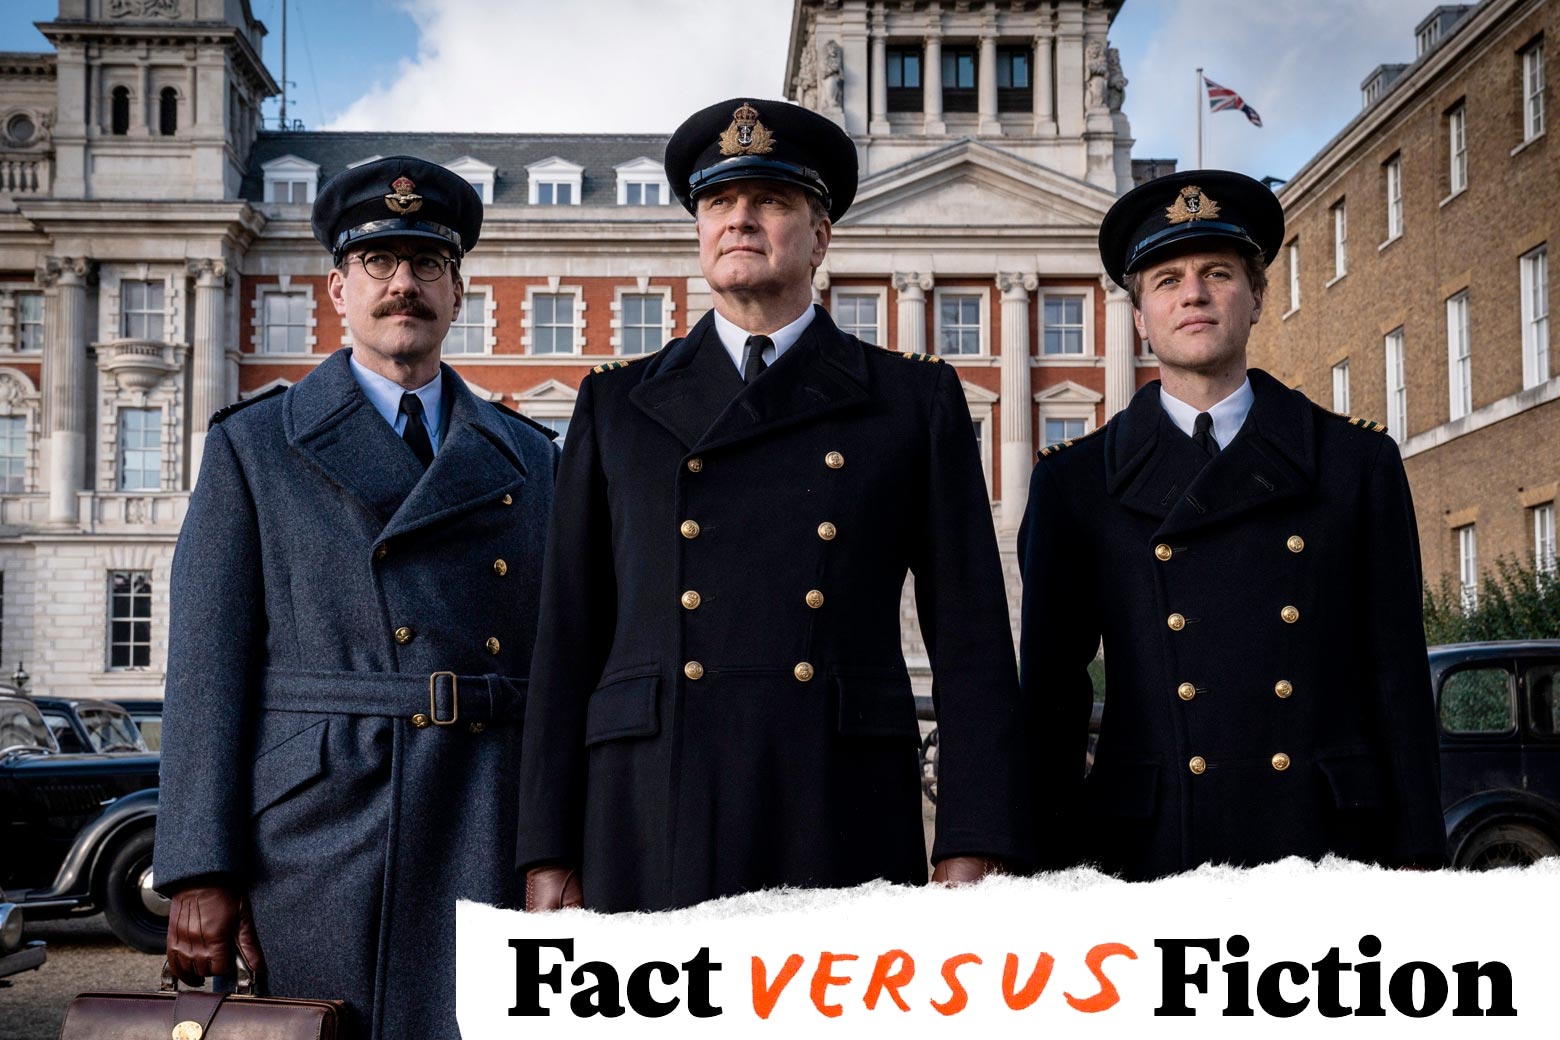 Operation Mincemeat on Netflix the true story behind the Colin Firth movie.